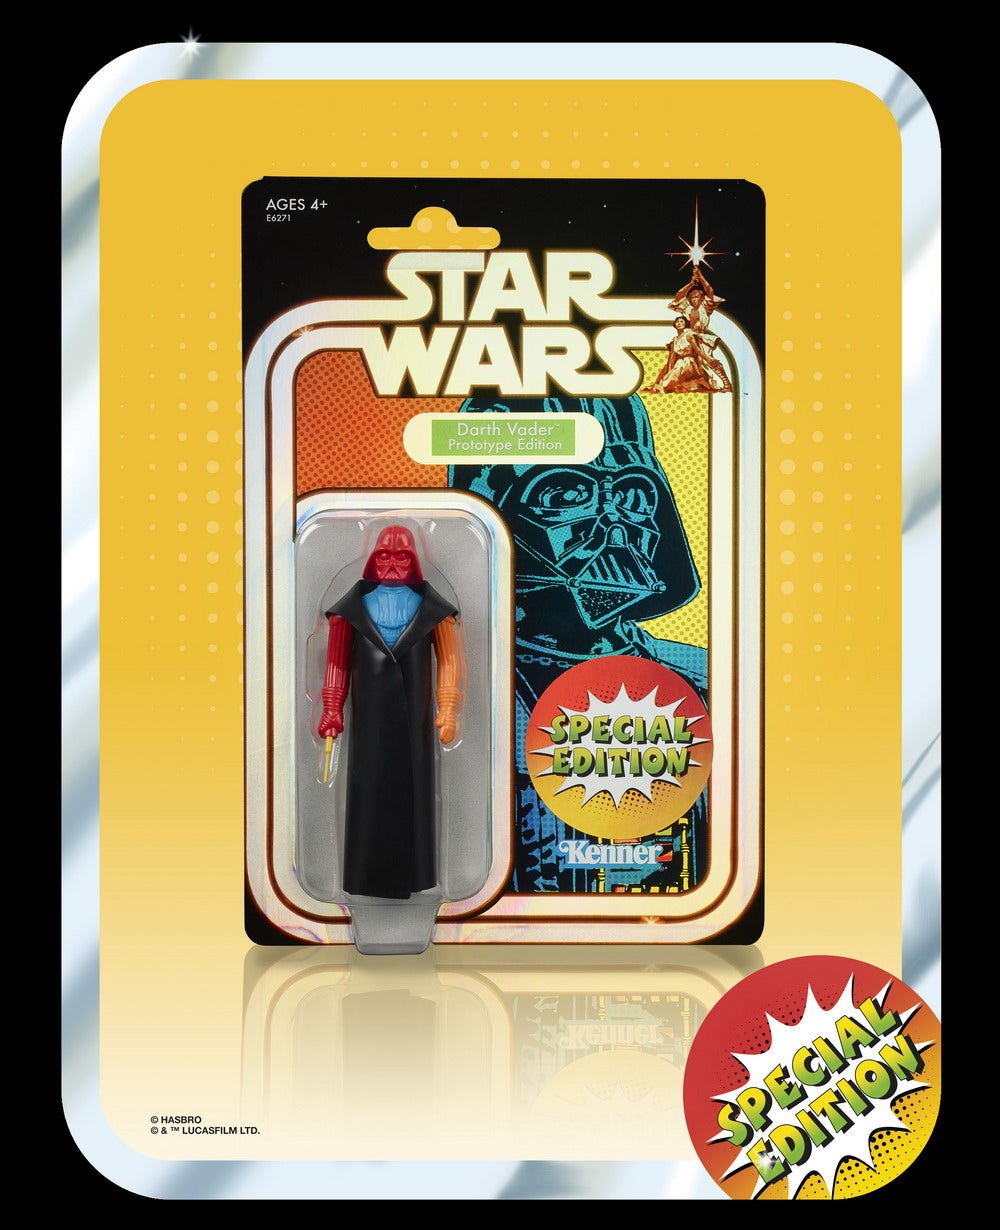 STAR WARS SPECIAL EDITION RETRO PROTOTYPE 3.75-INCH DARTH VADER Figure - in pack (2)